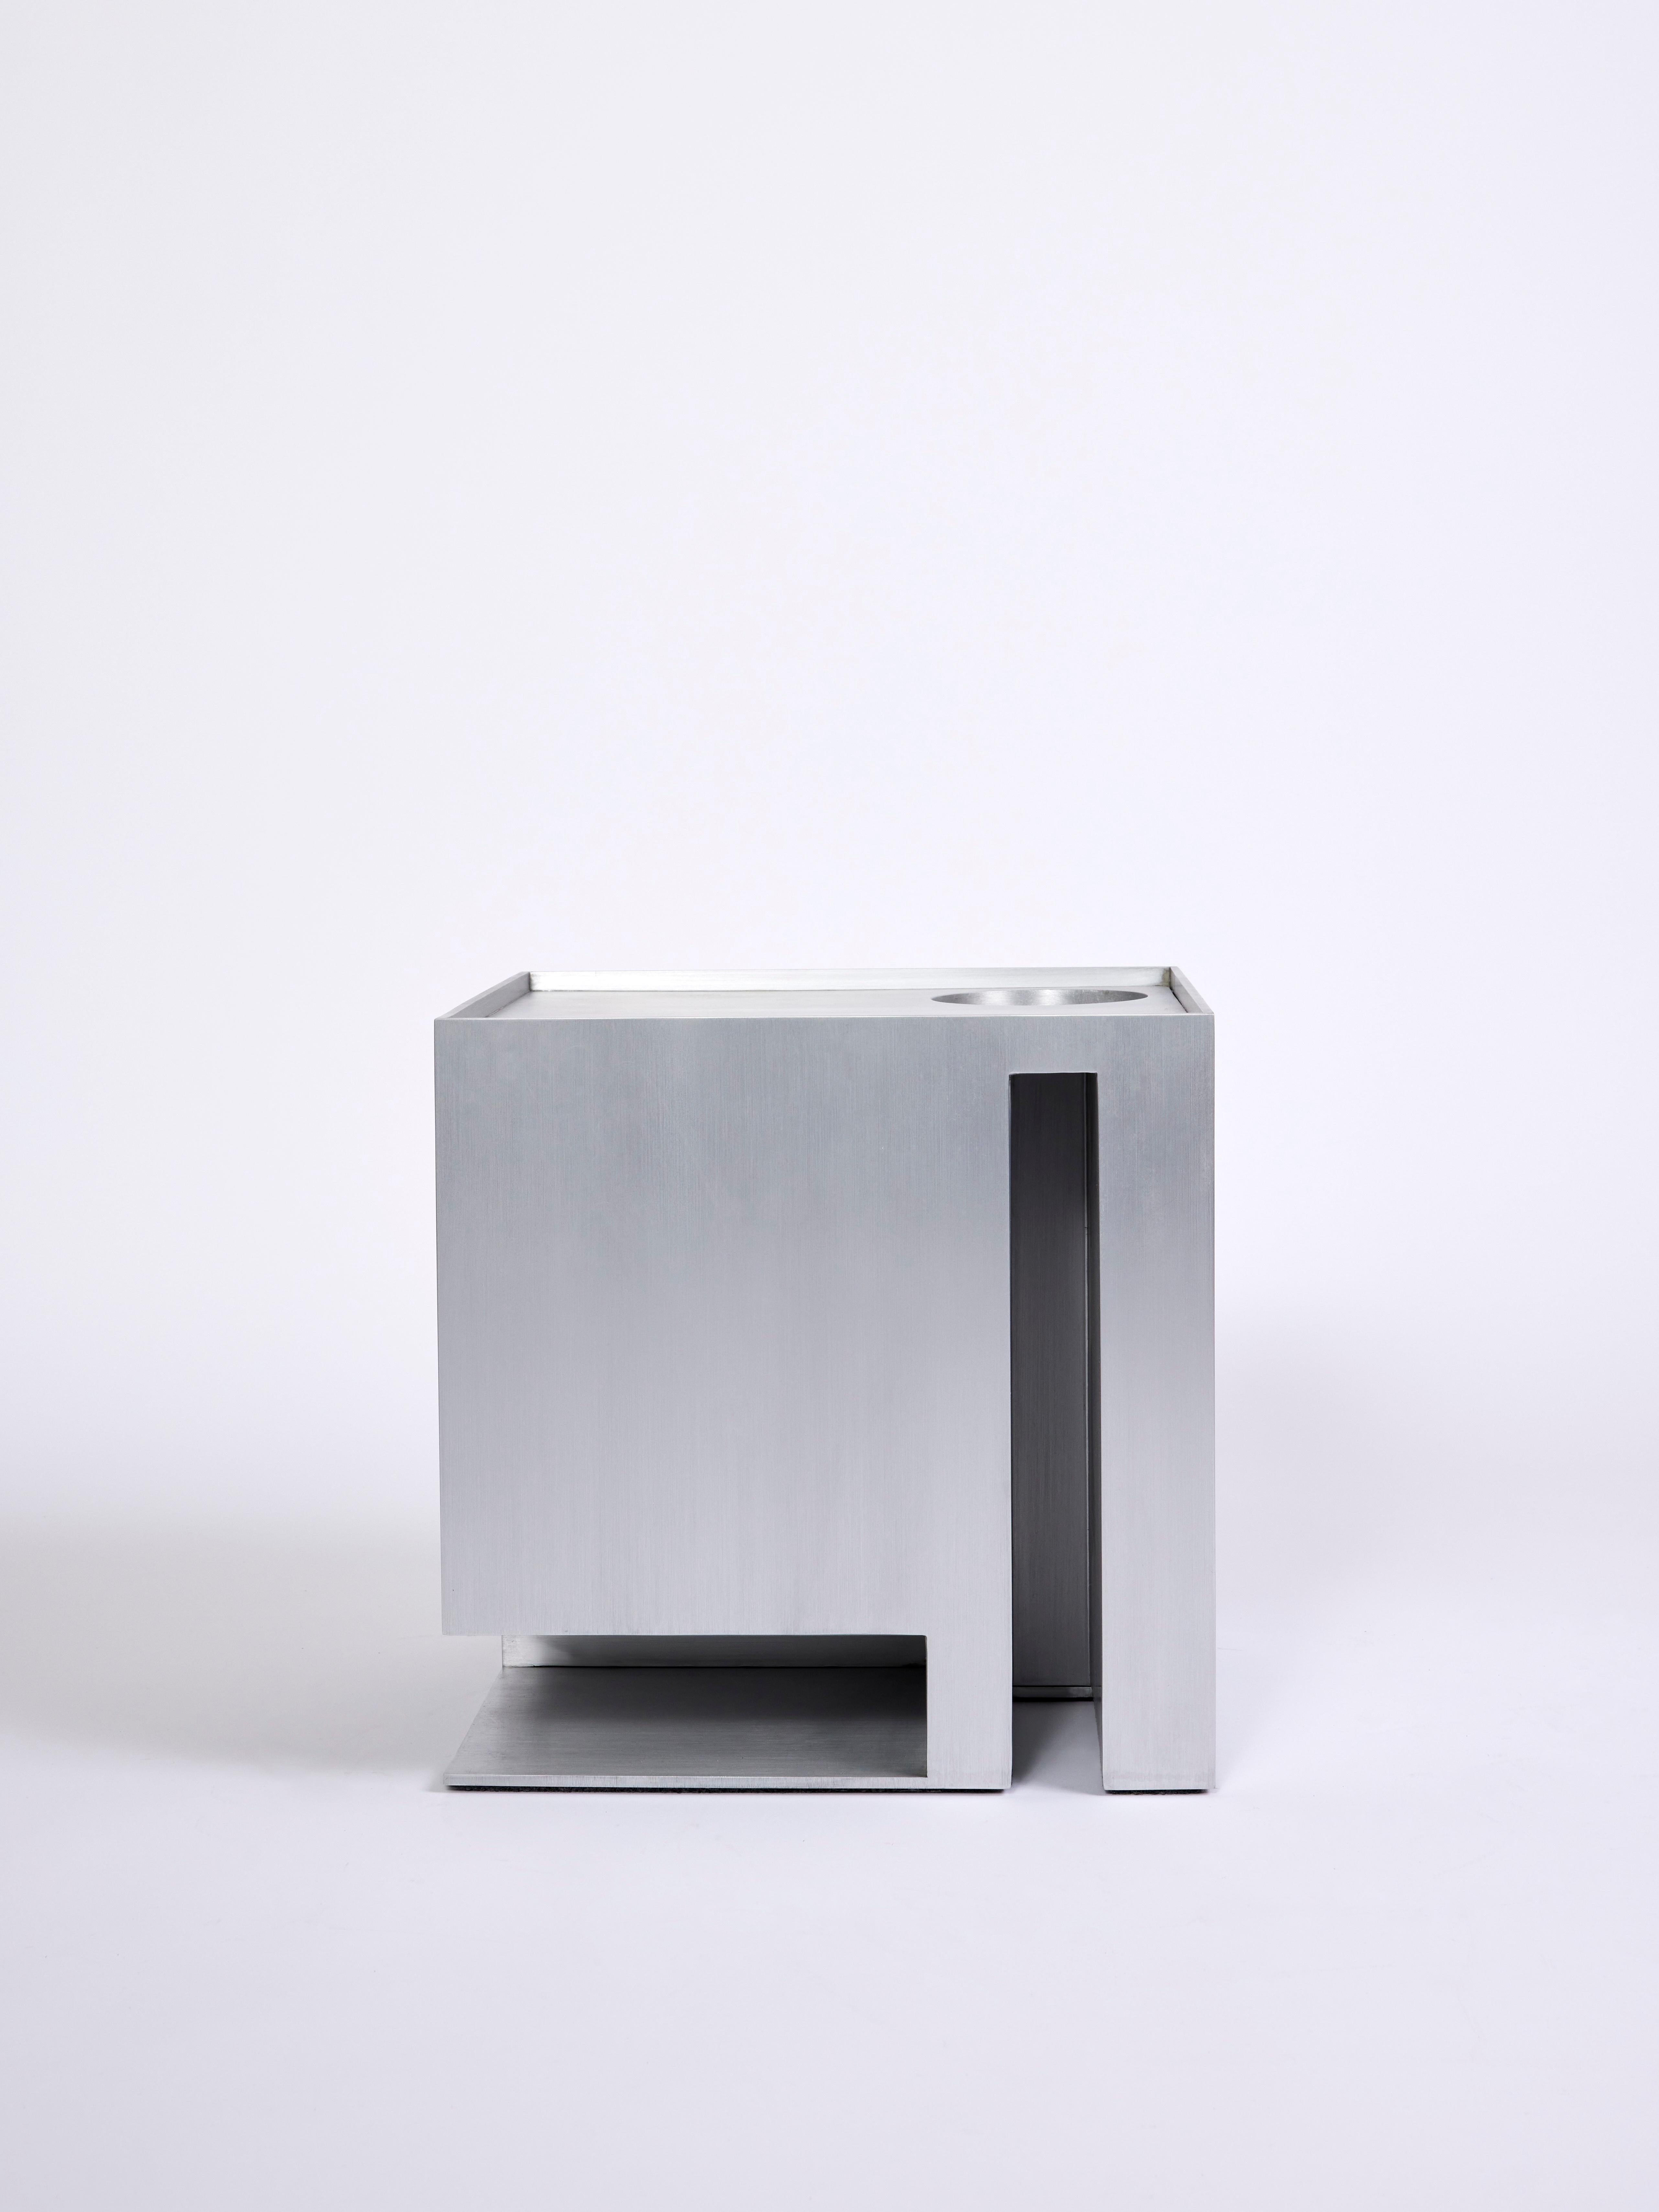 Dwell Side Table

Materials: hand brushed aluminum with clear coating
Dimensions: W16 x D16 x H16 inches

Dwell side table is inspired by the exterior of a boxy model home. Different geometric forms like circles and lines create negative spaces